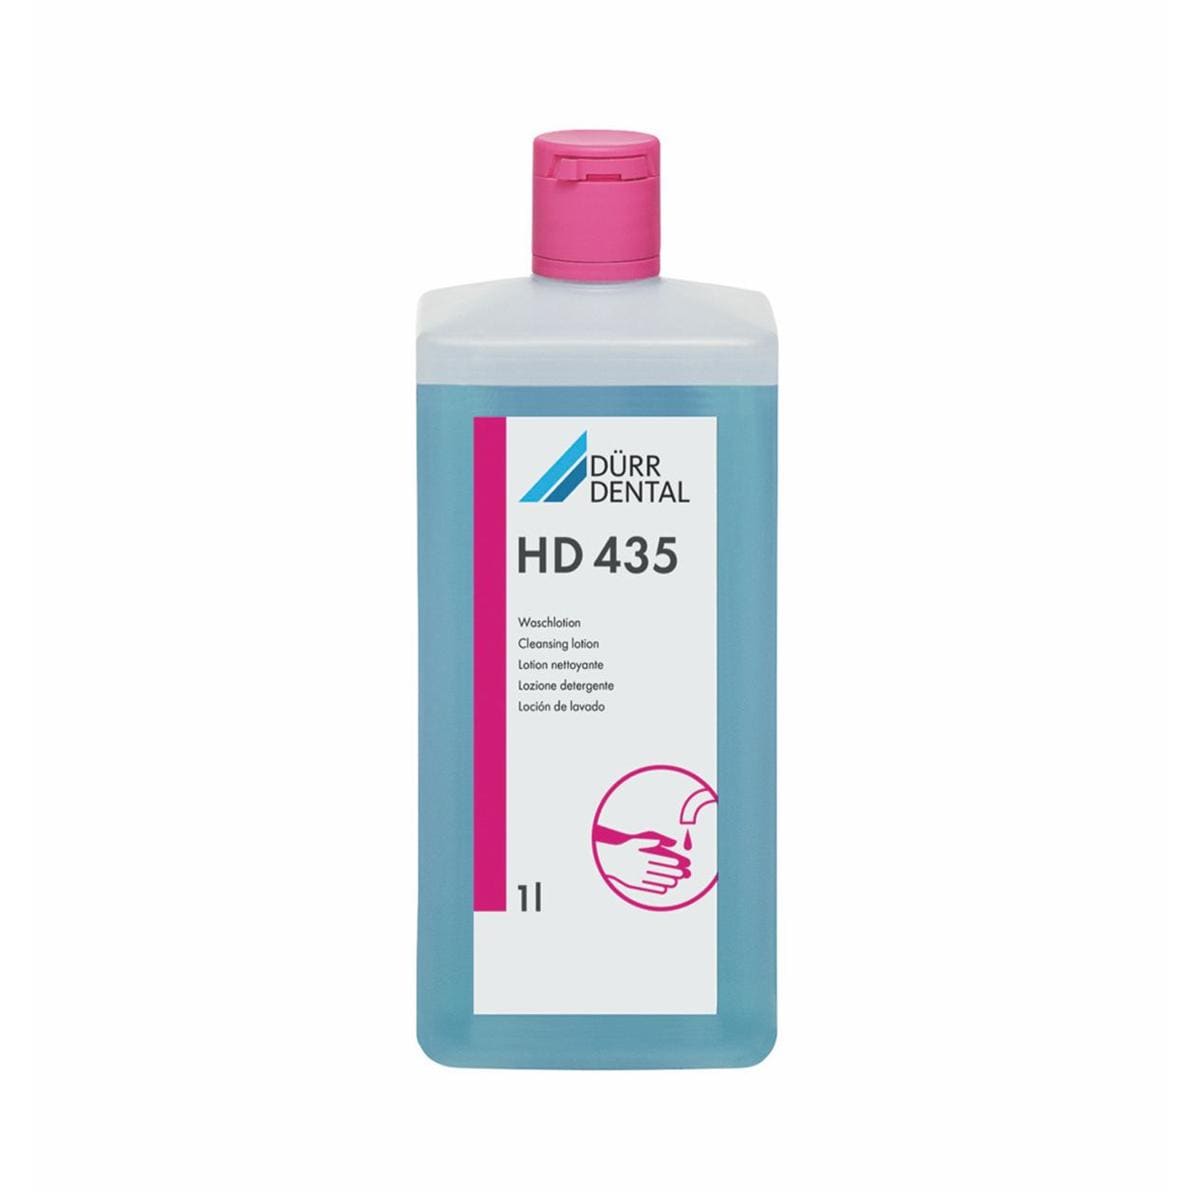 HD 435 Hand Wash Lotion 1L For T1000 Dispenser